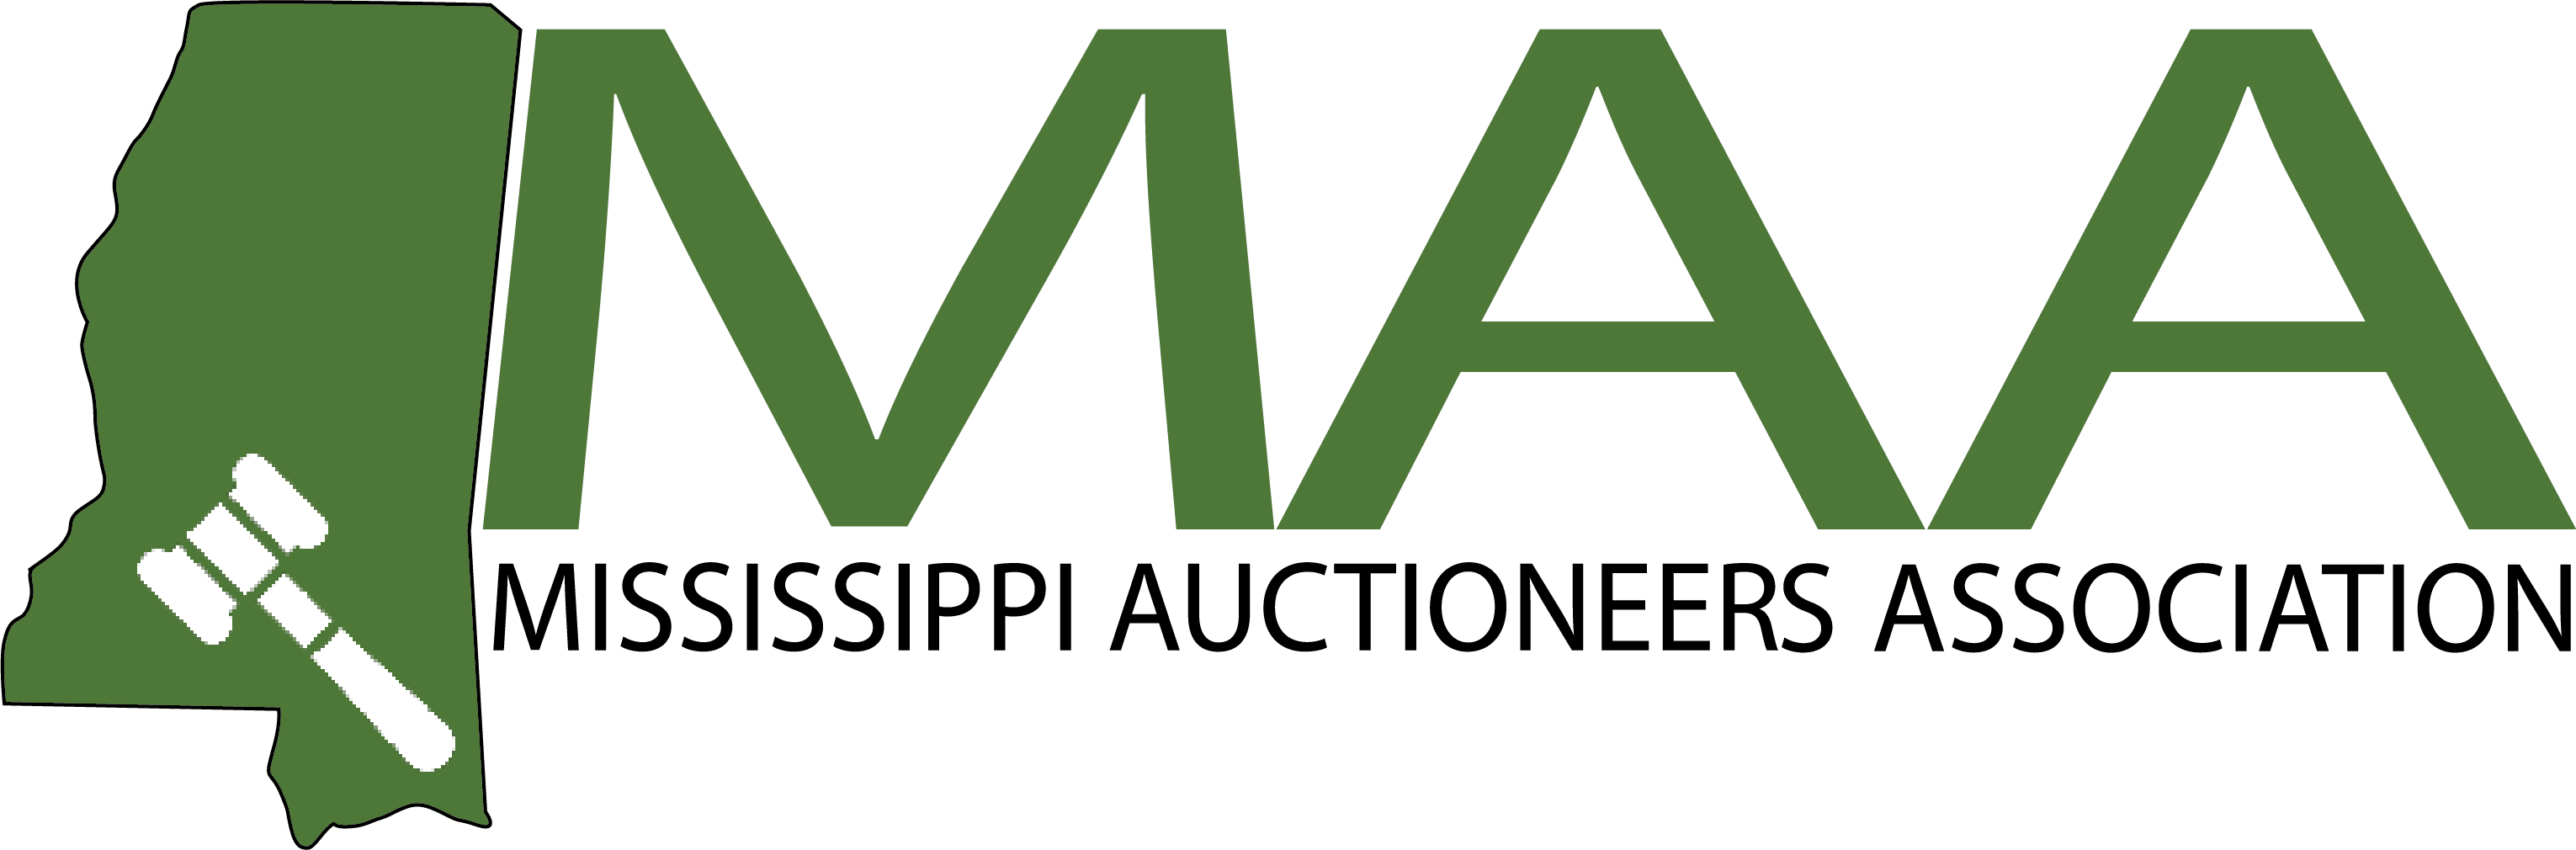 Mississippi Auctioneers Association